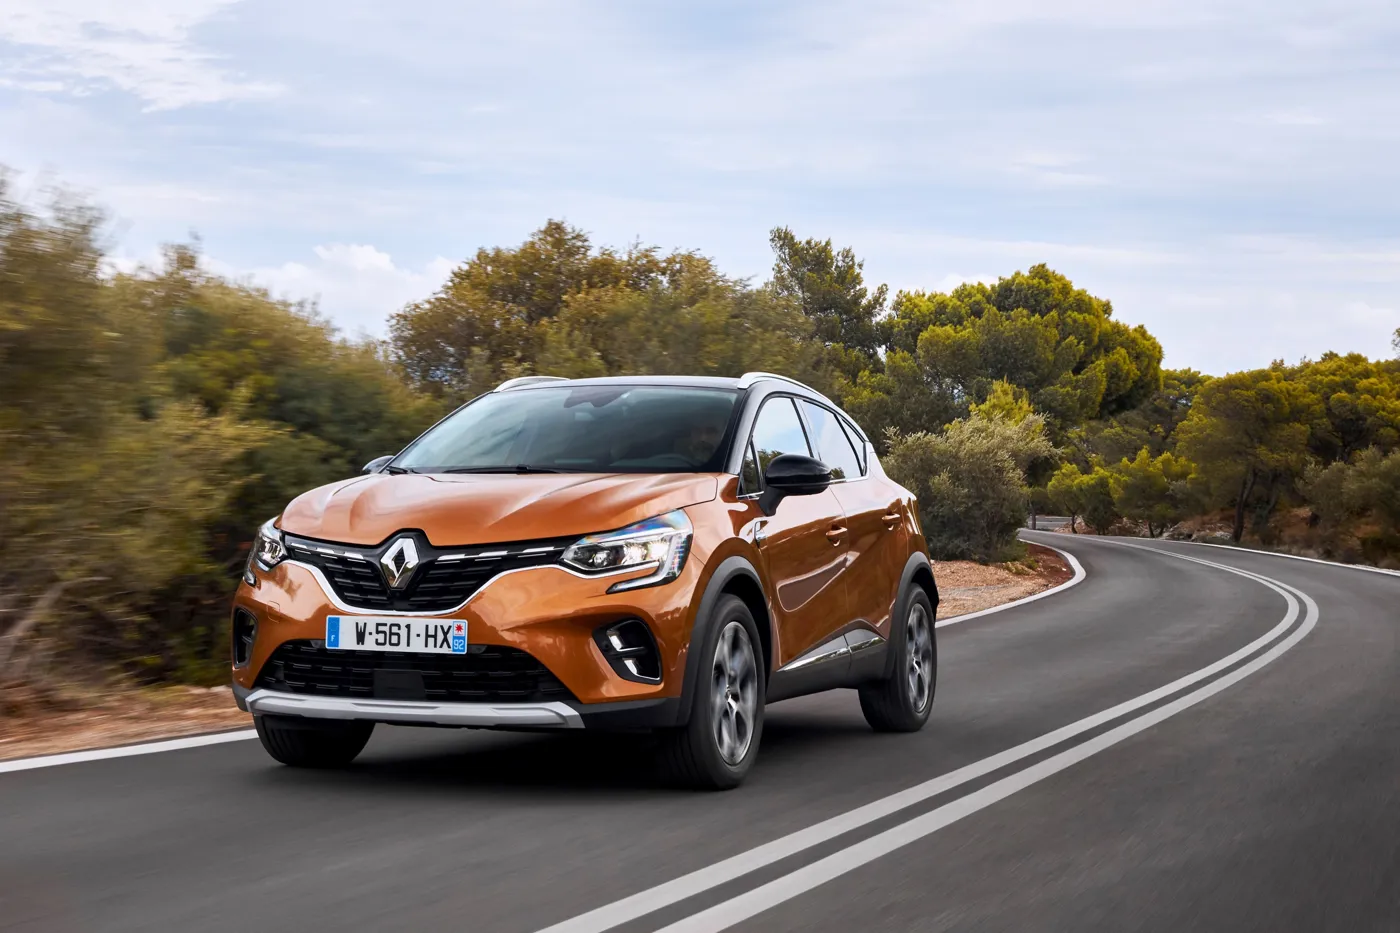 2020 Renault Captur first drive review